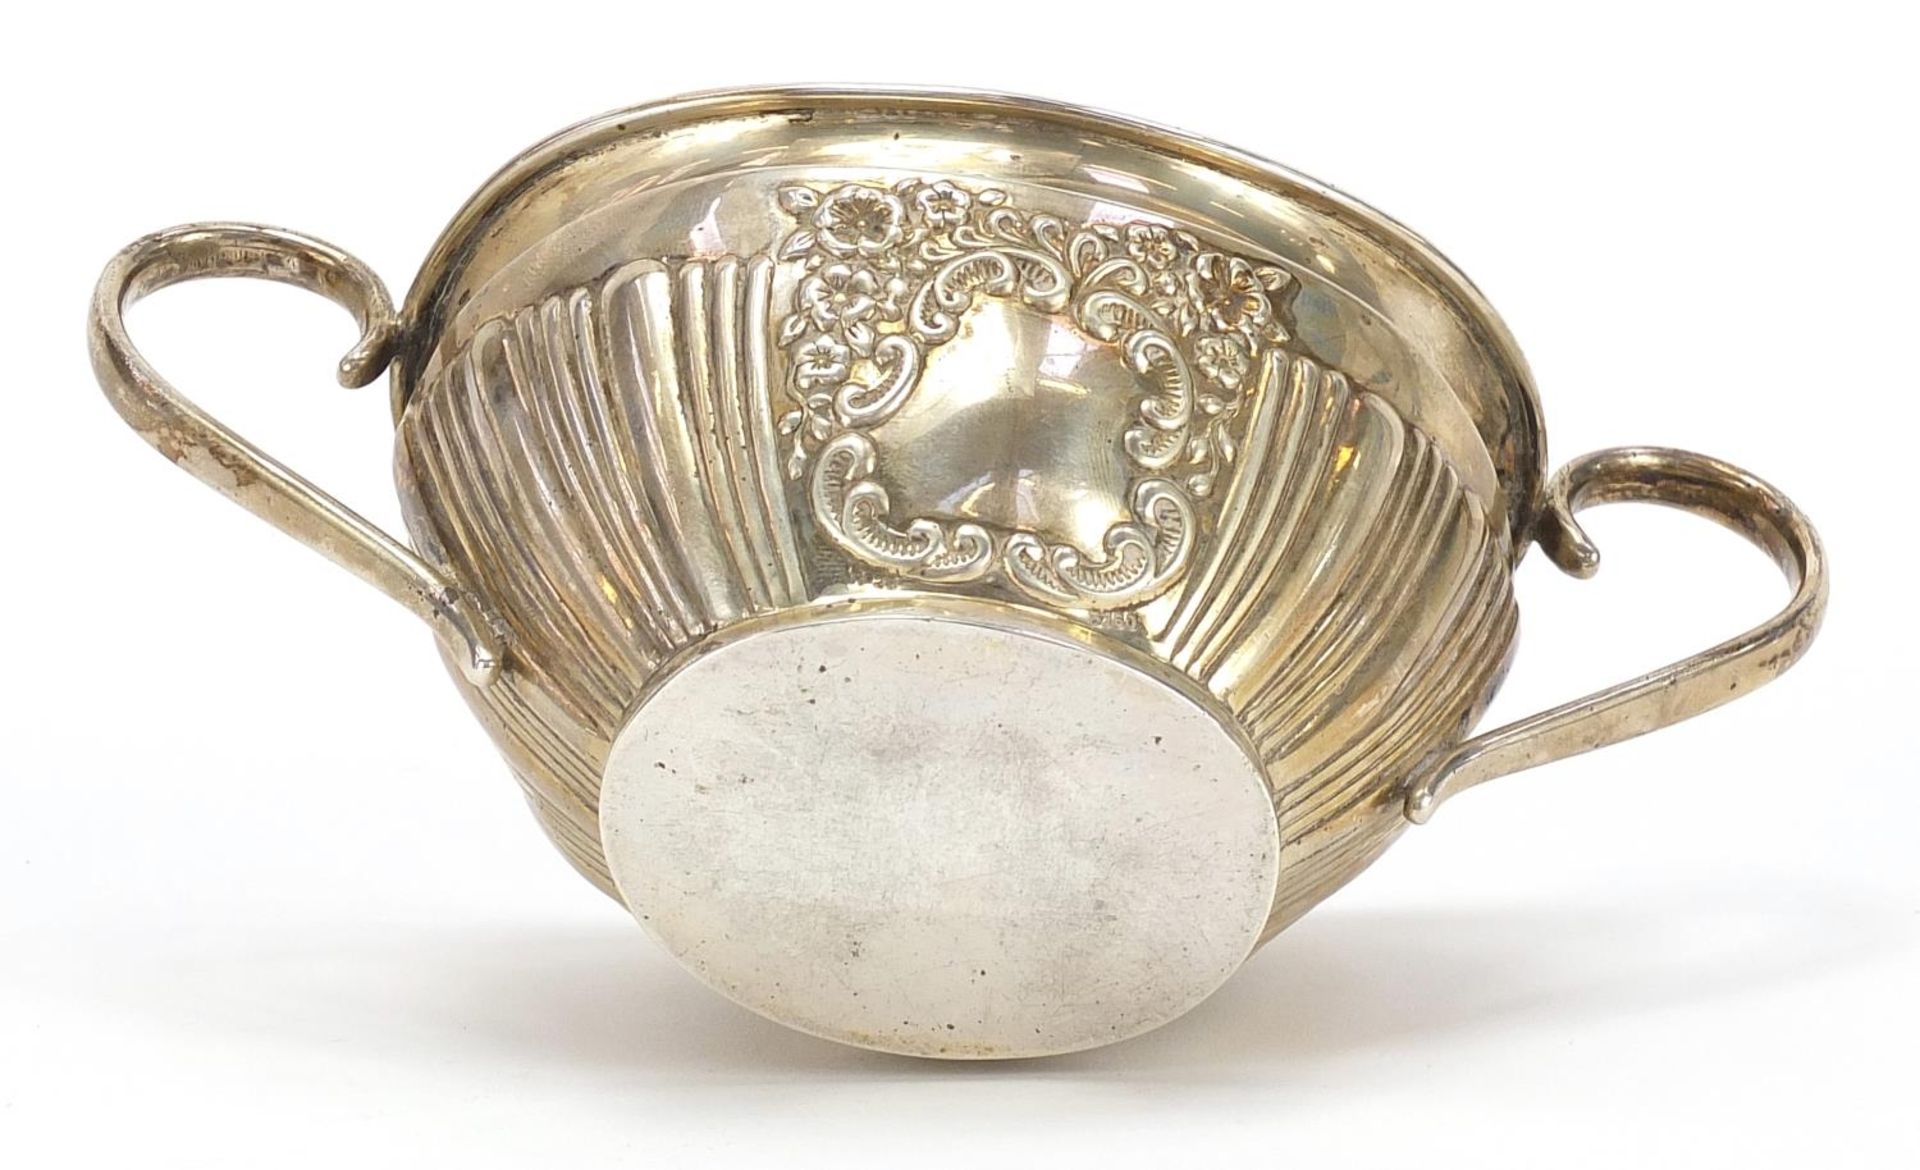 Joseph Gloster Ltd, Victorian silver sugar bowl with demi fluted body, blank cartouche and twin - Image 4 of 4